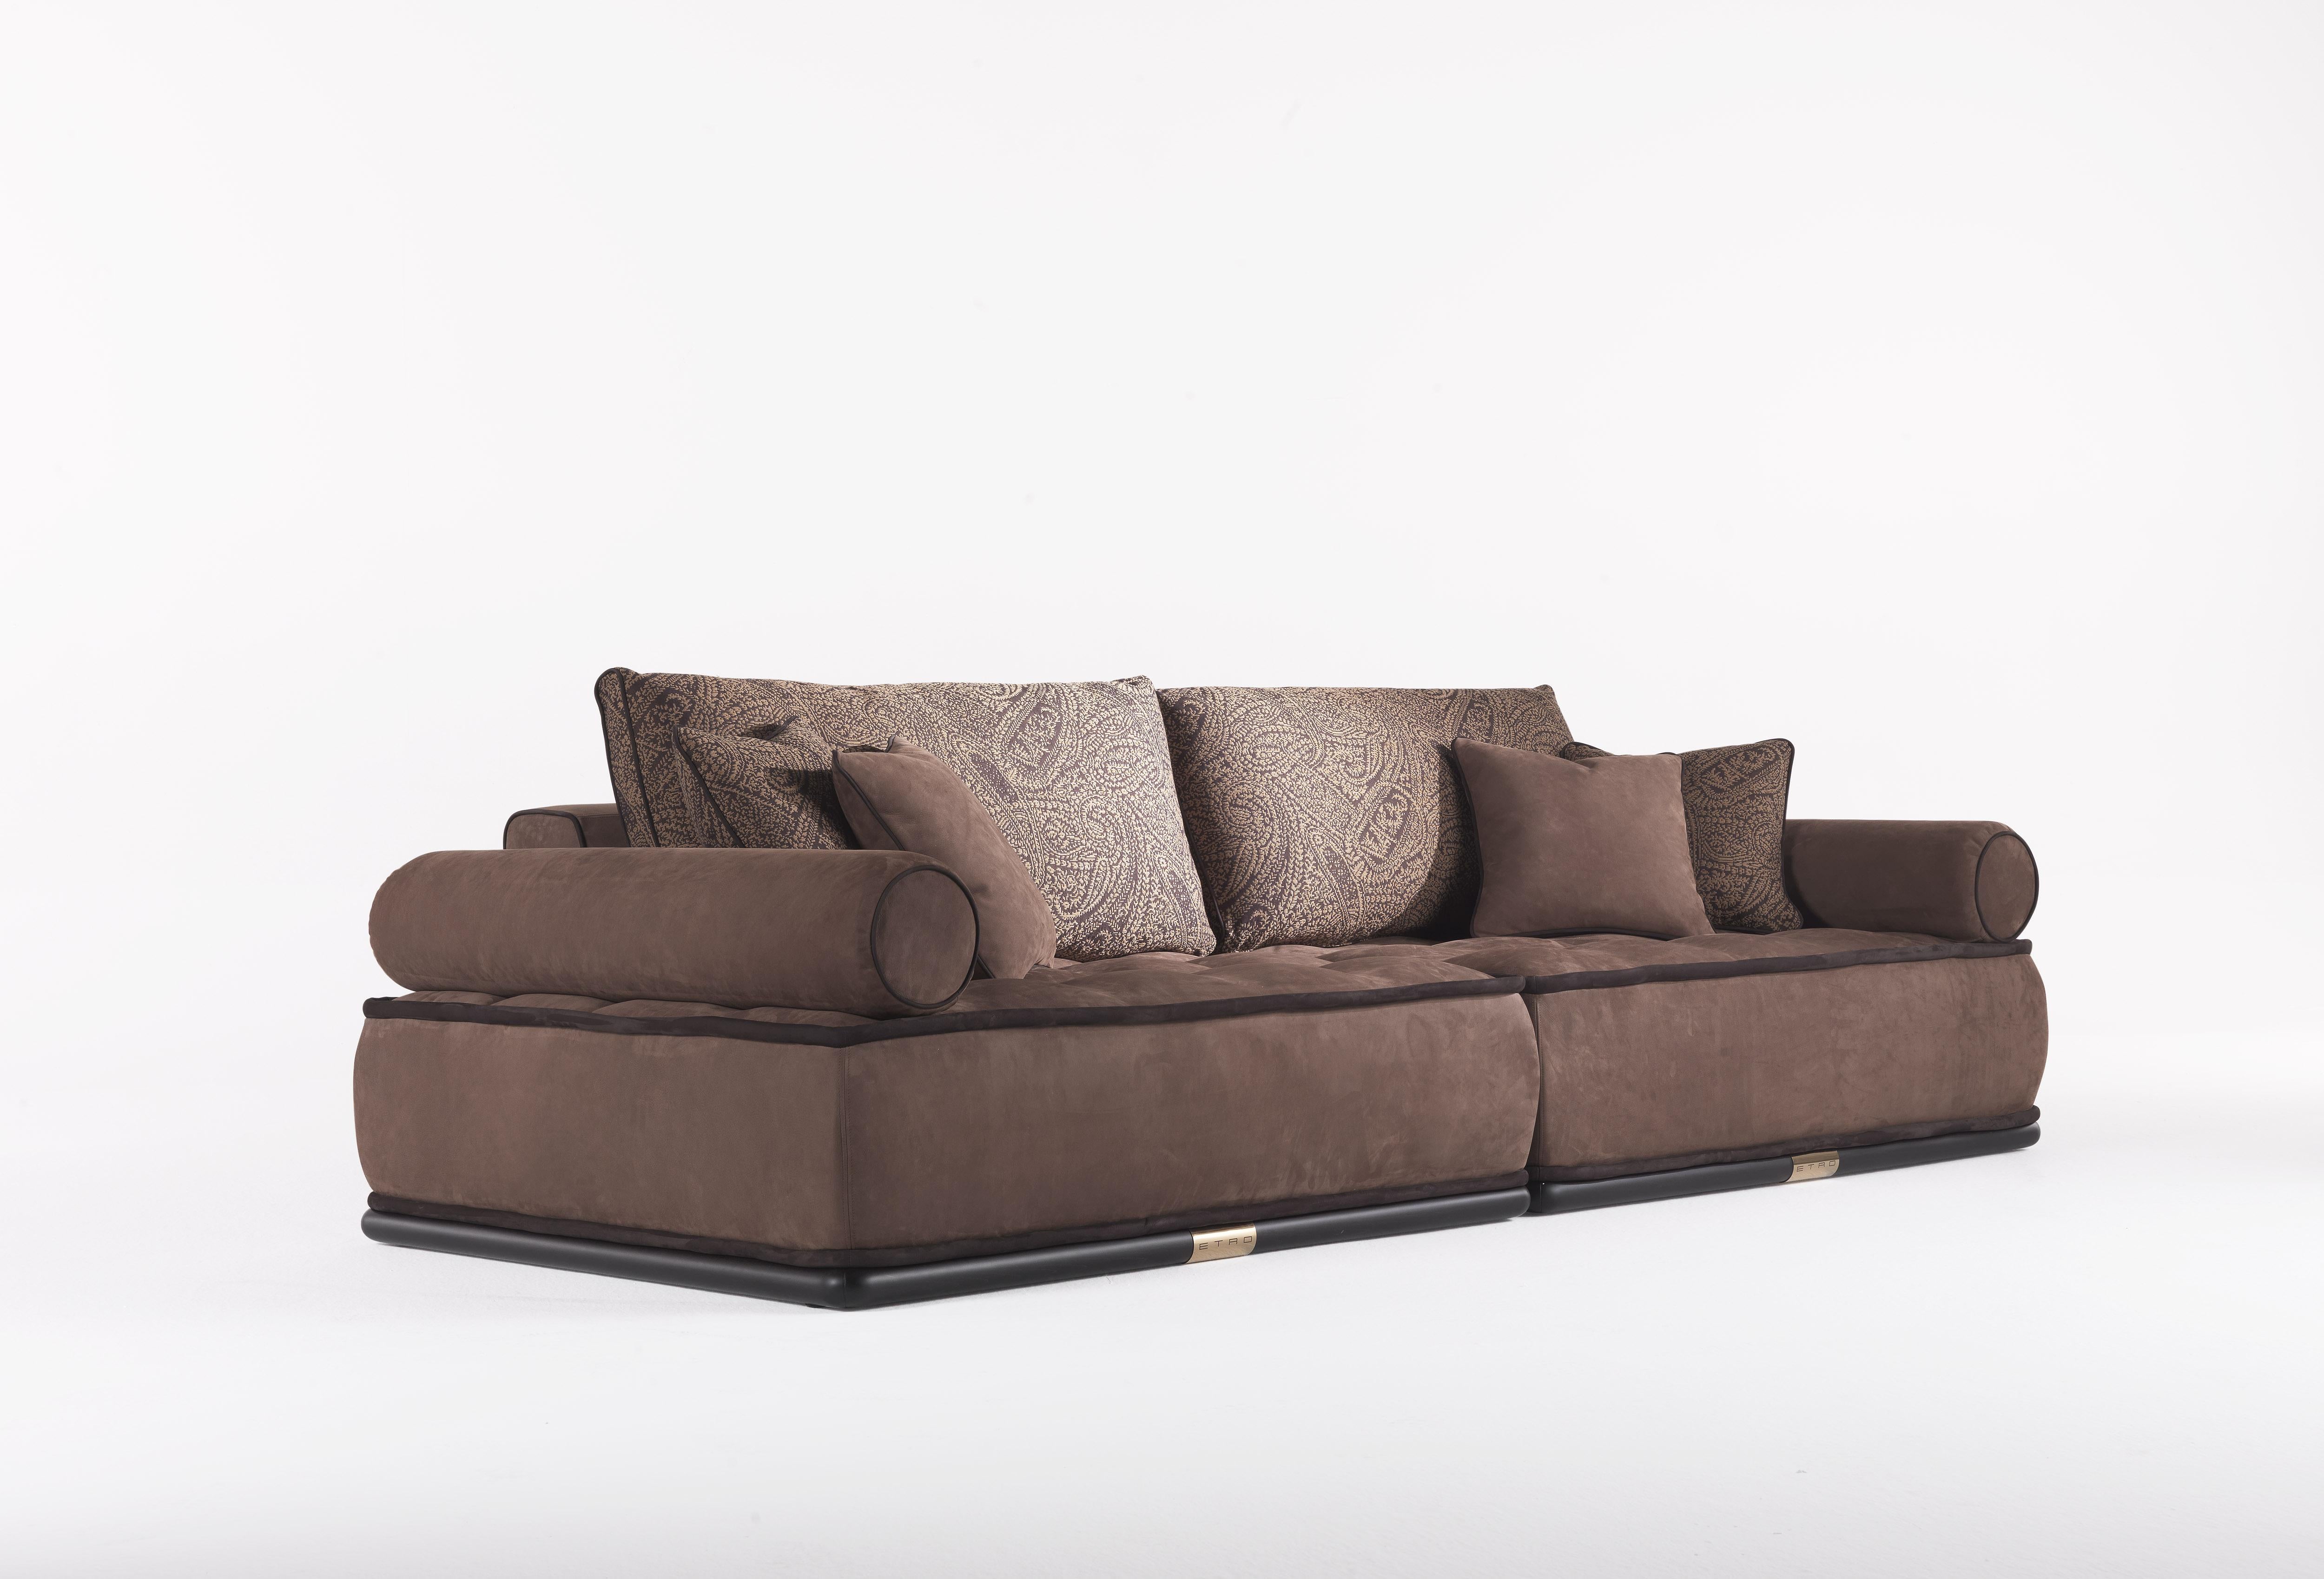 In the new edition Woodstock sofa, re-elaborated in a modular version and without fees, the mattress-like conformation of ethnic inspiration, recalls the 